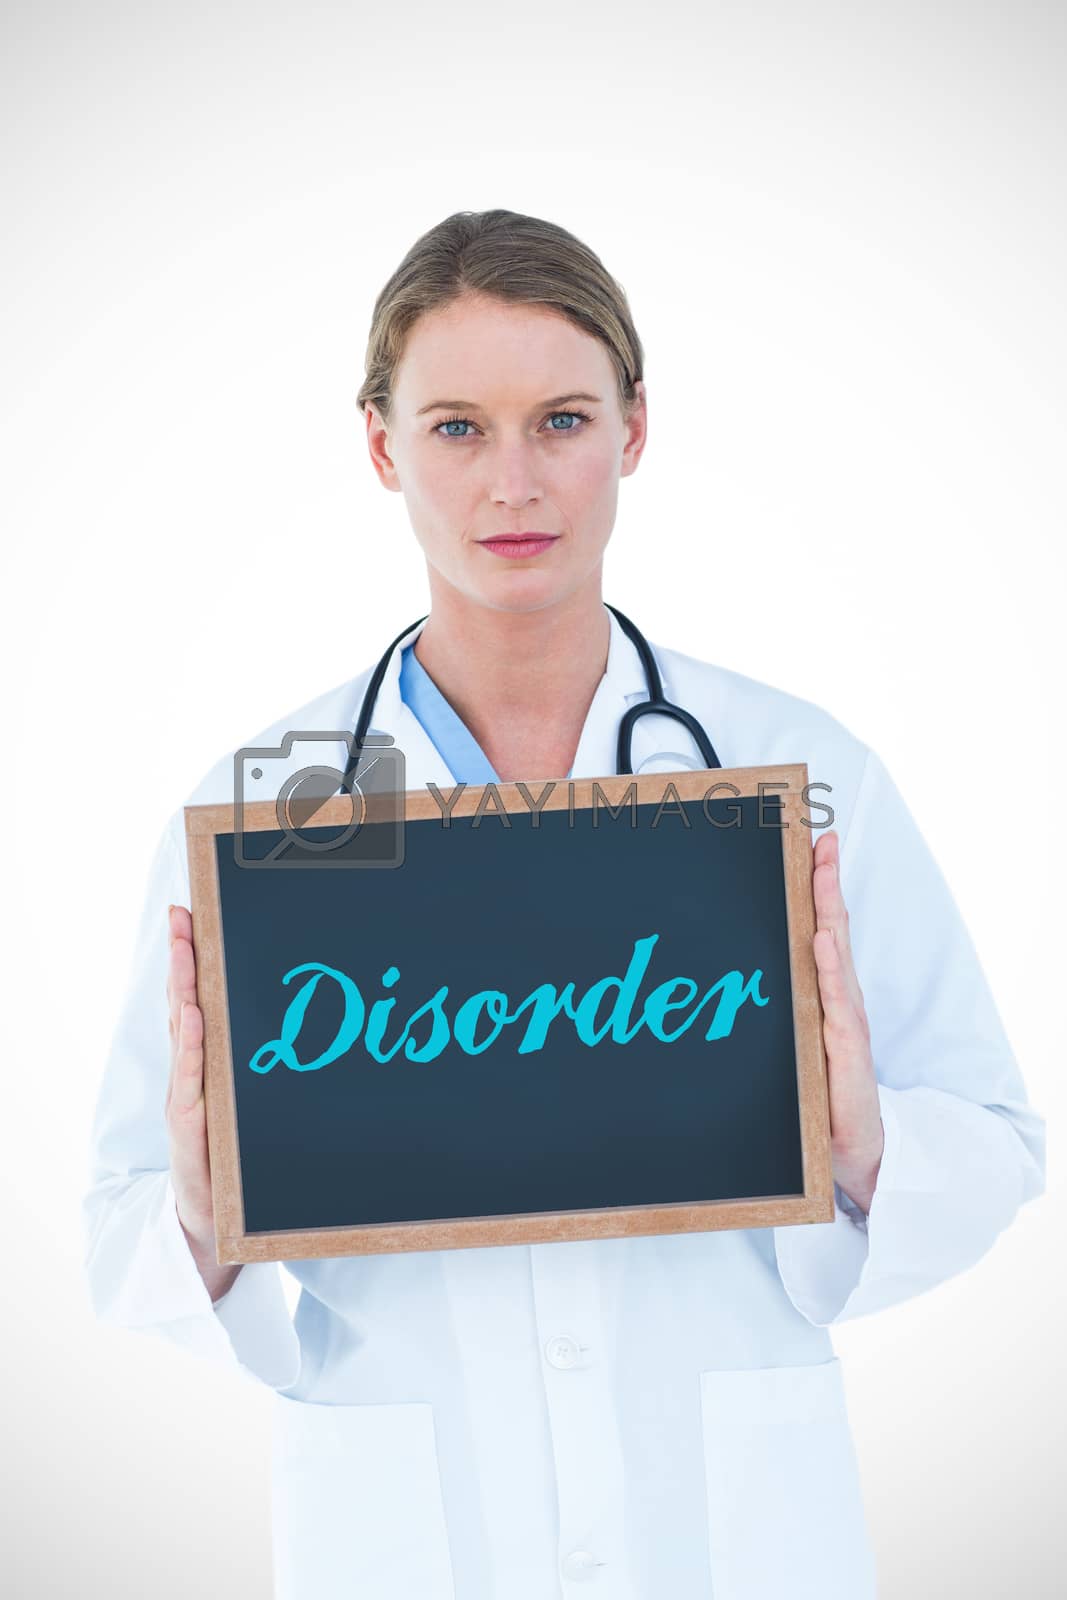 Royalty free image of Disorder against doctor showing chalkboard by Wavebreakmedia